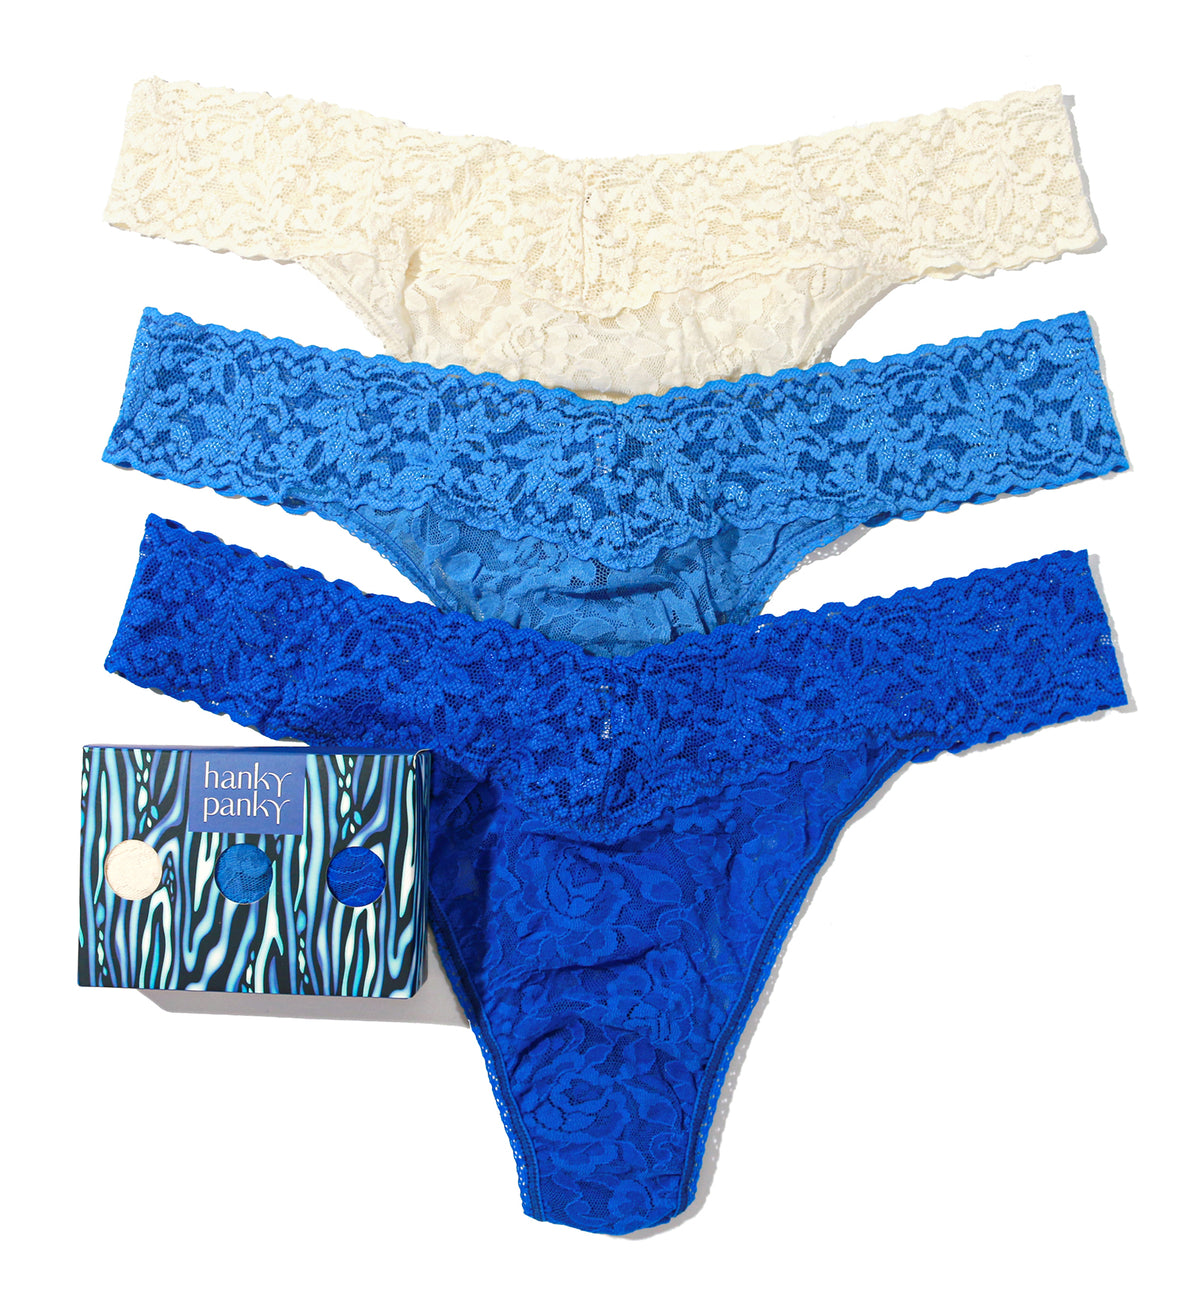 Hanky Panky 3-PACK Signature Lace Original Rise Thong (48113PK),Sea You - Ivory/ Forget Me Not/ Sapphire,One Size